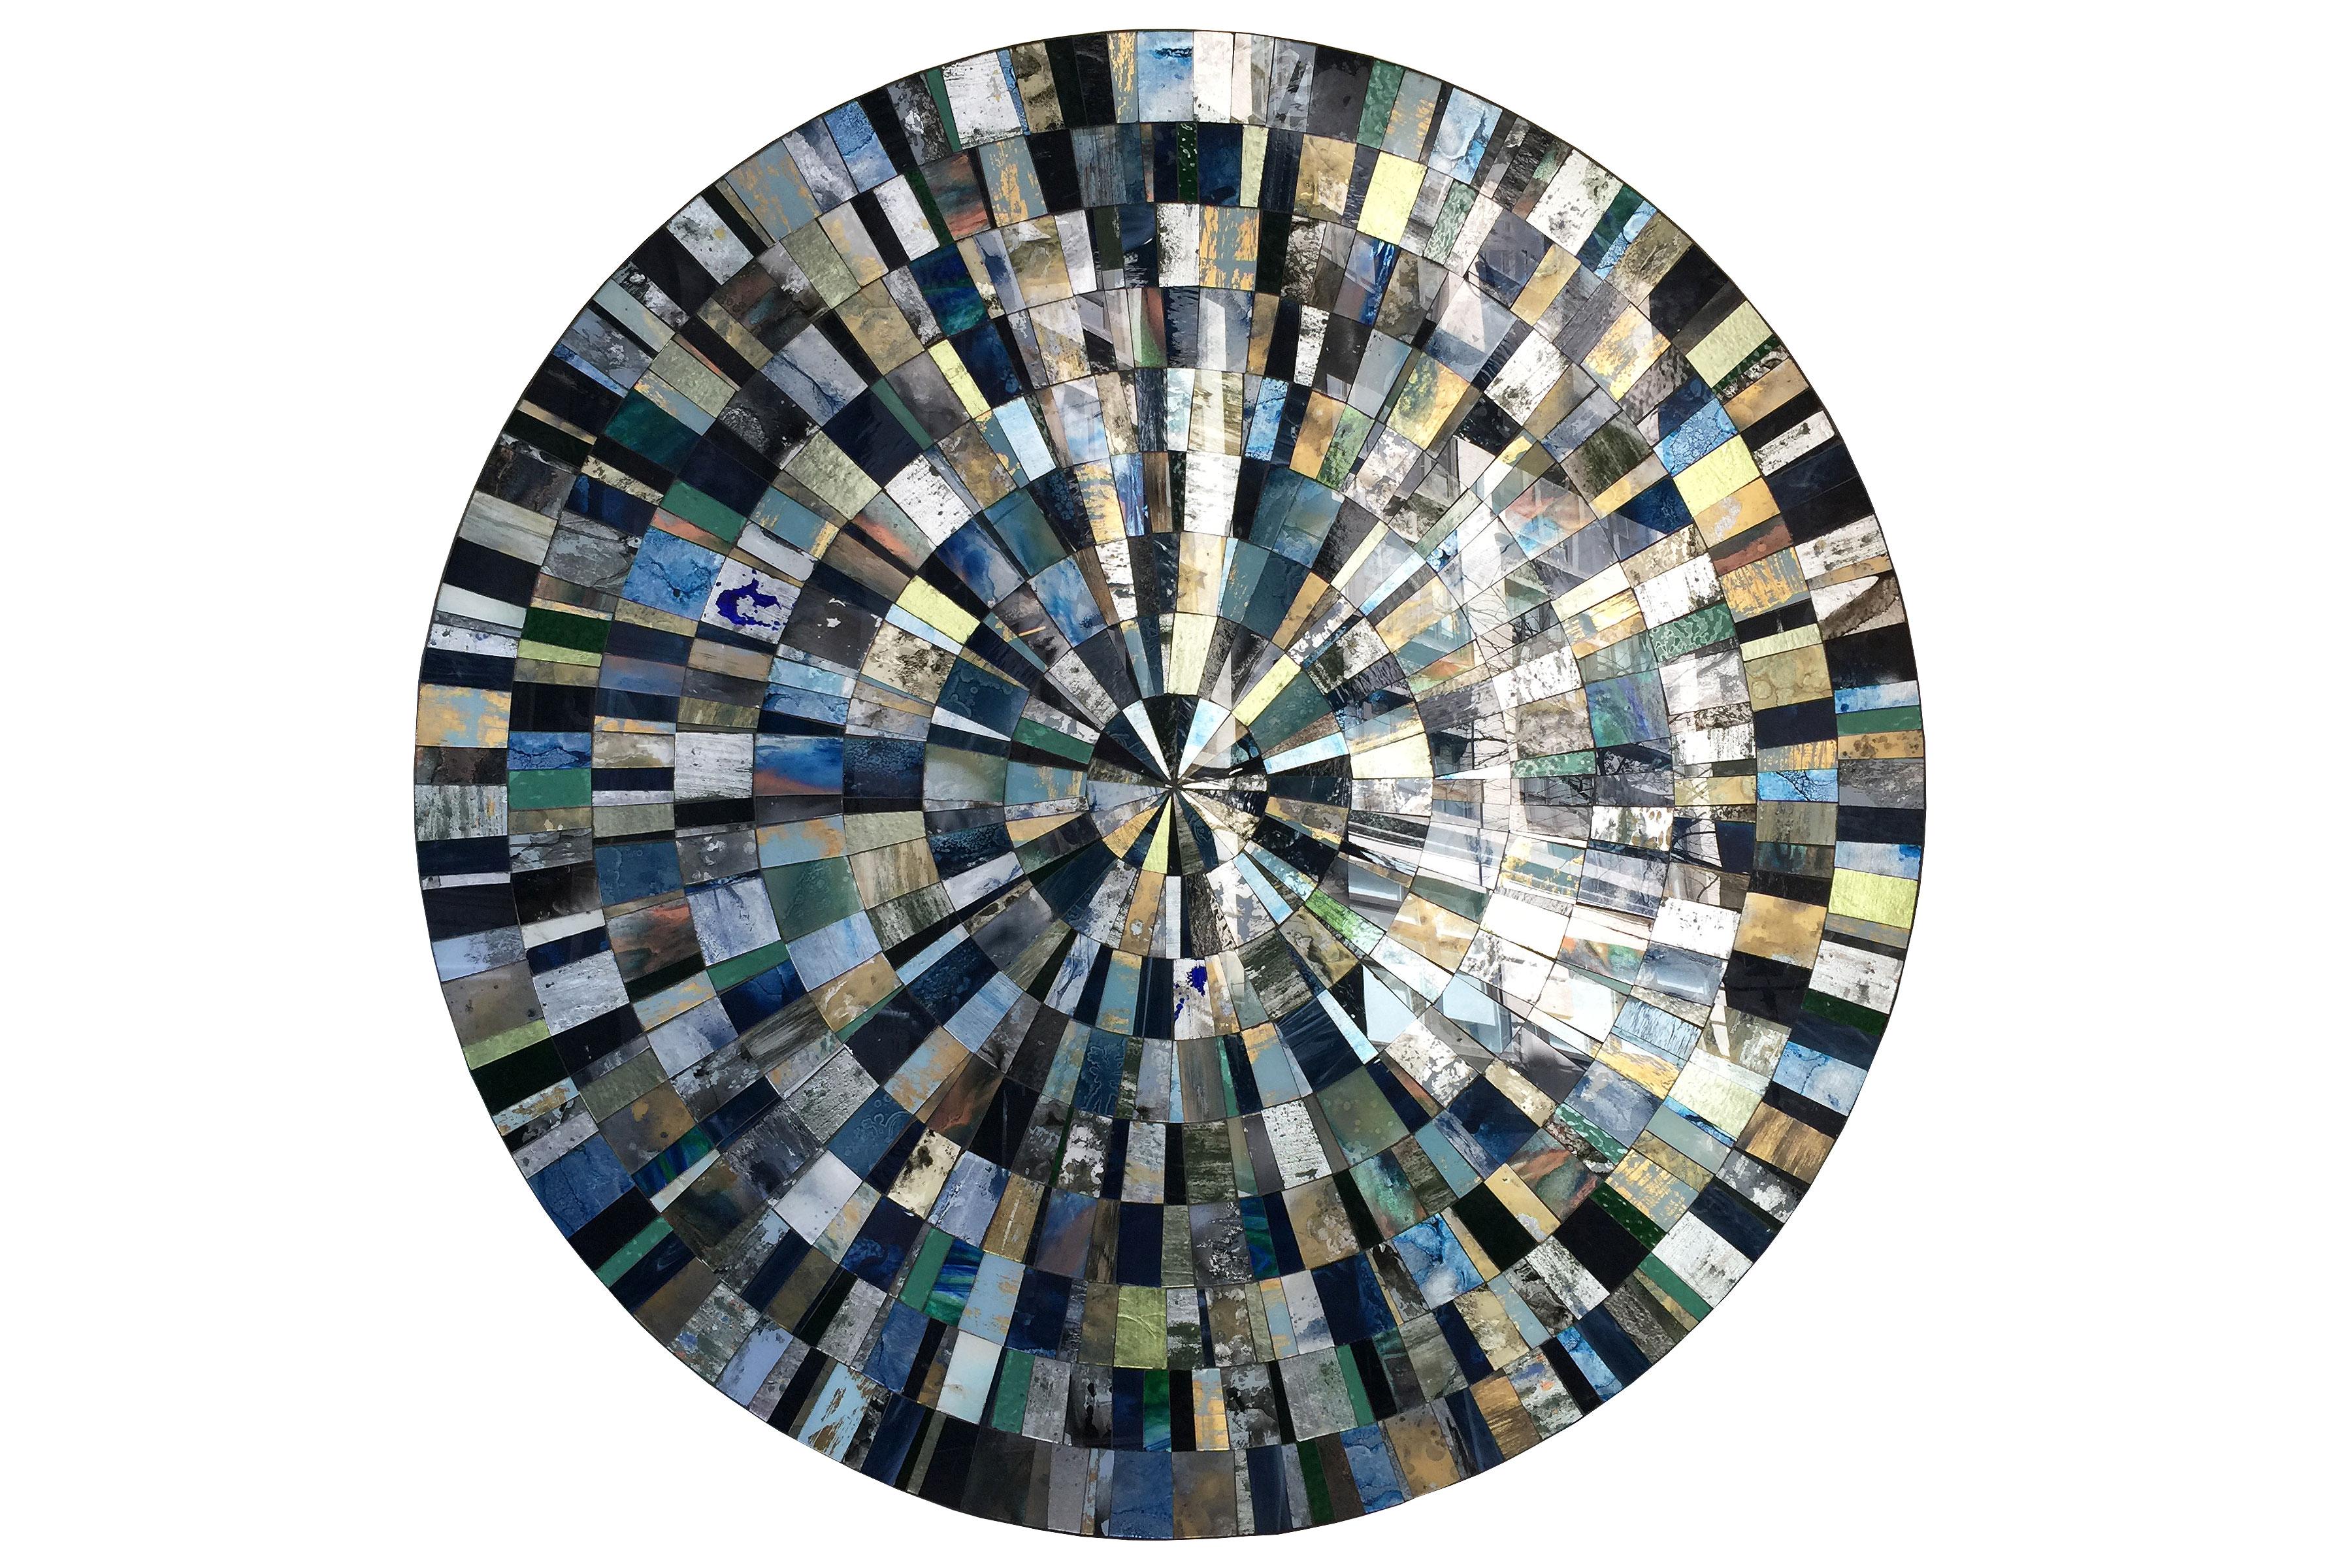 Aqua (églomisé) mosaic coffee table designed by Ercole Home with hand painted glass mosaic surface in Sunburst pattern.
The base is made of 1/2